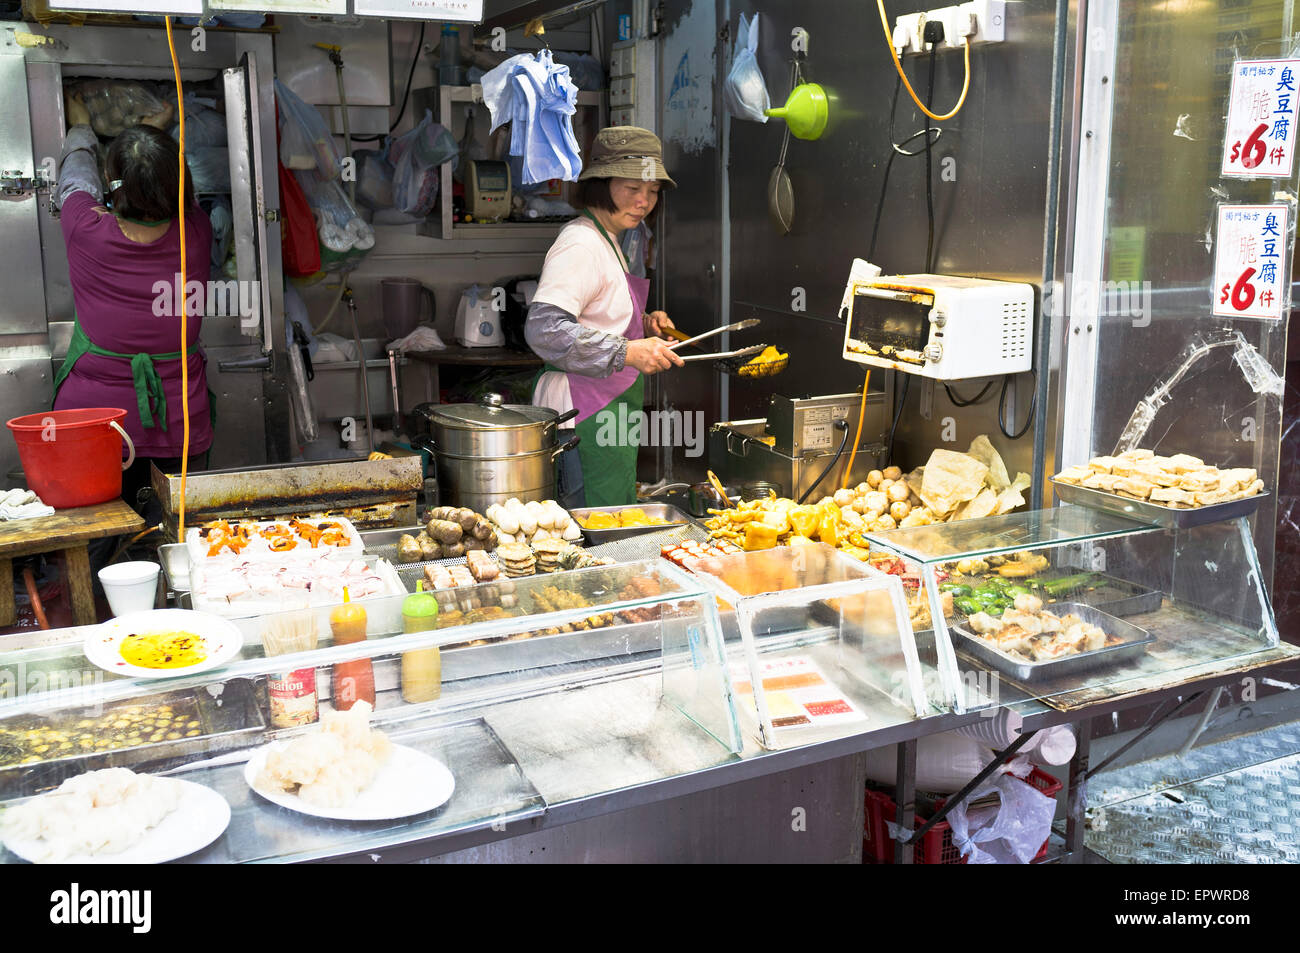 Dh Street Food Mong Kok HONG KONG Street vendeur alimentaire fast-food chinois cuisine Banque D'Images